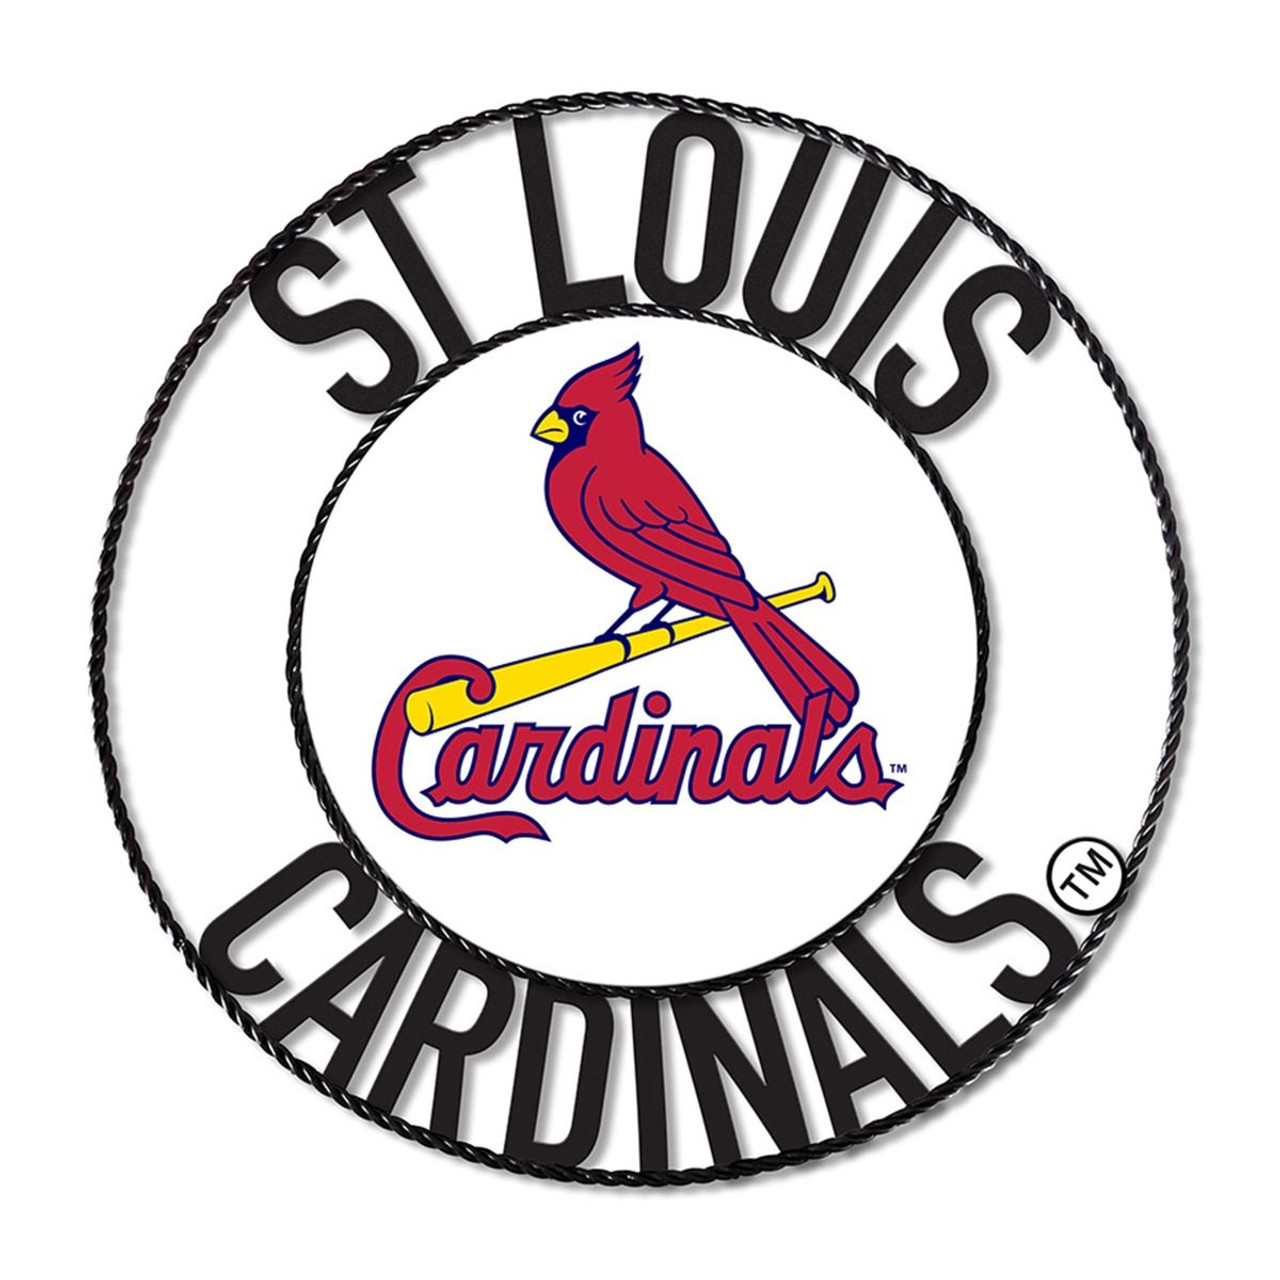 St, Louis Cardinals, 24", WI, Wrought Iron, Wall Art, 584-2008, Imperial, MLB, 720801133164